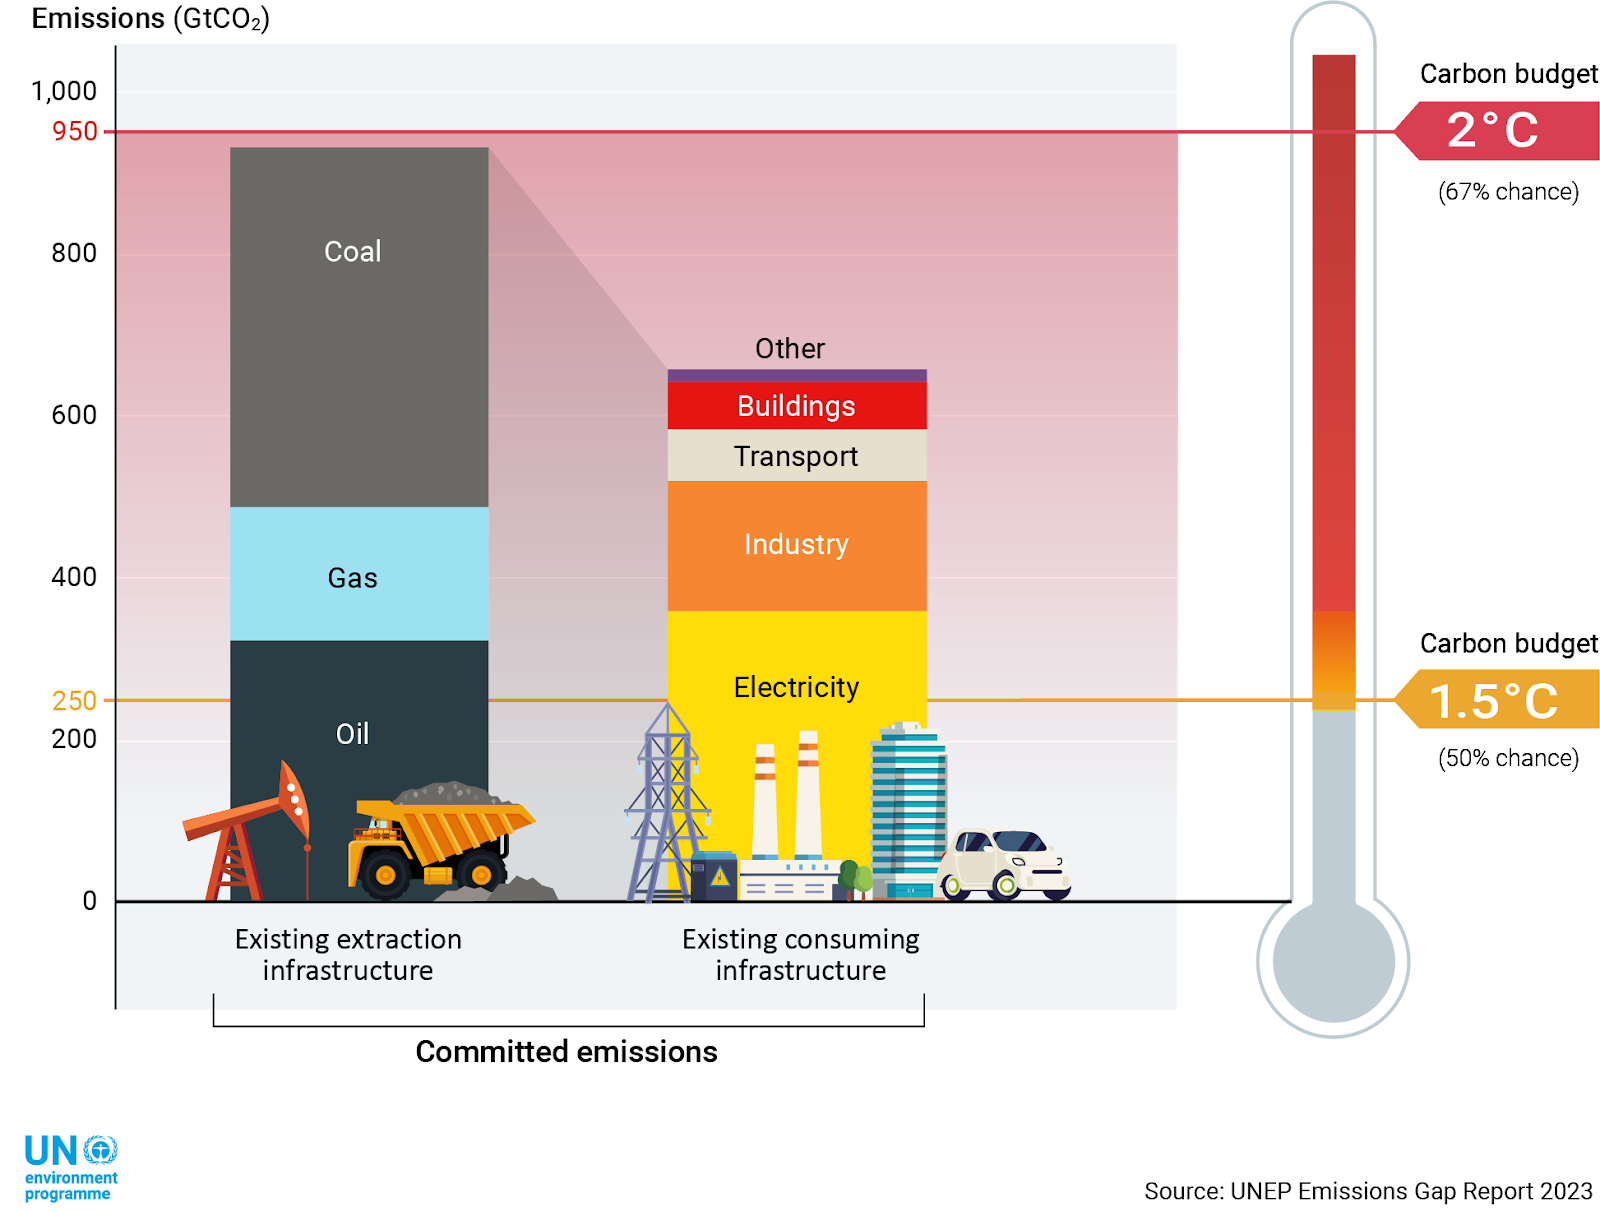 Committed CO2 Emissions From Existing Fossil Fuel Infrastructure, Compared with Carbon Budgets Reflecting the Long-Term Temperature Goal of the Paris Agreement, Source: UNEP